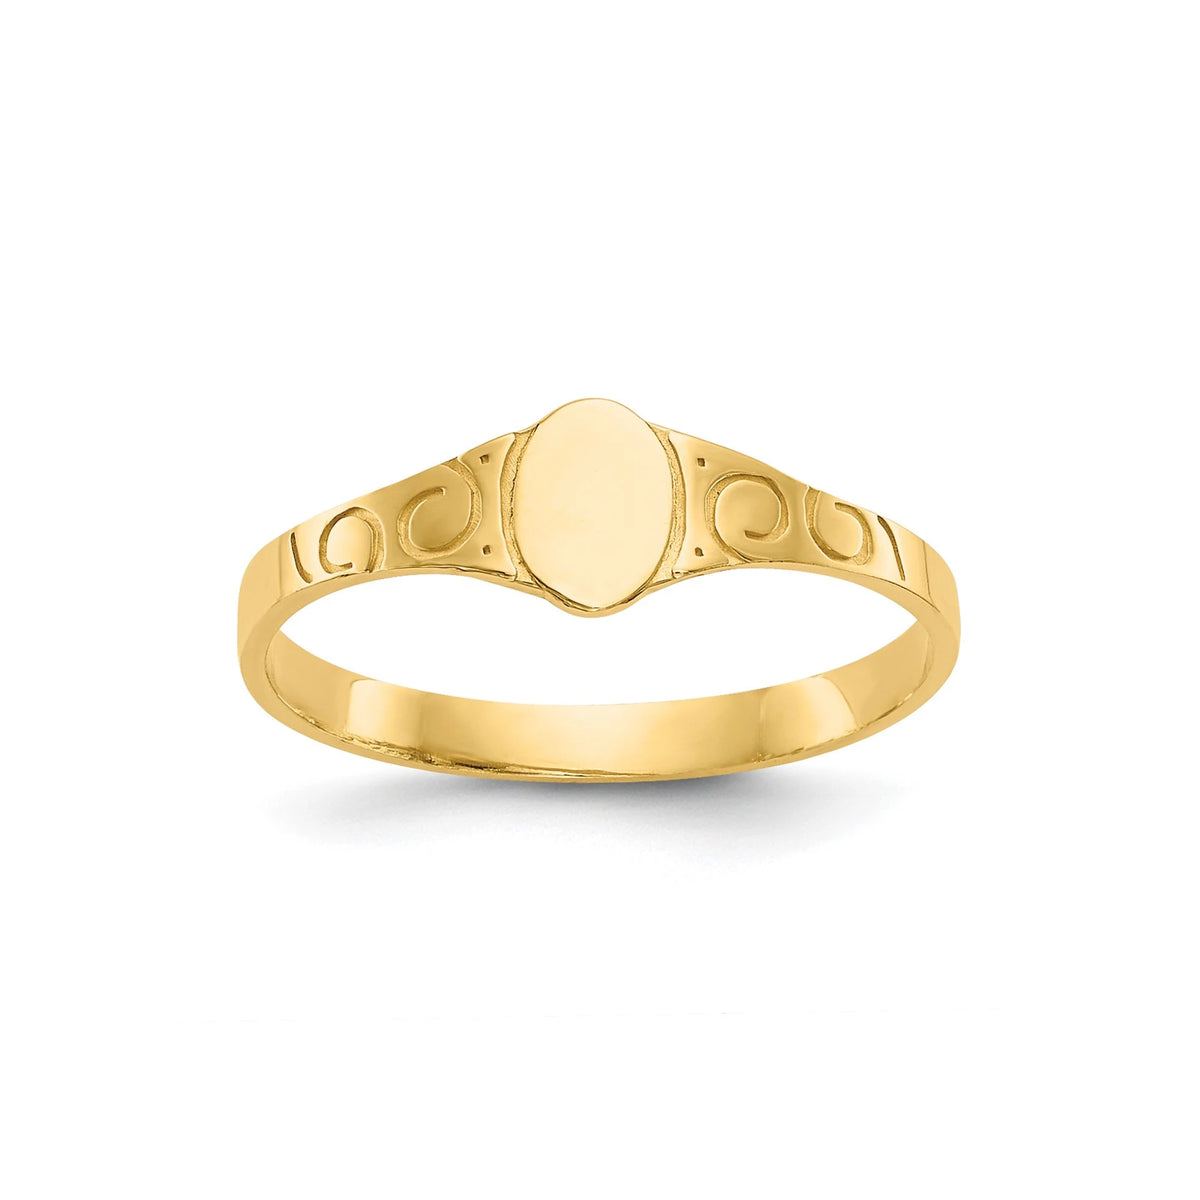 Genuine 14k Yellow Gold Oval Signet Ring Baby to Toddler / Band Size 1- 4 (1-5 year olds) Toddler Size Children's Ring Band - Gift Box